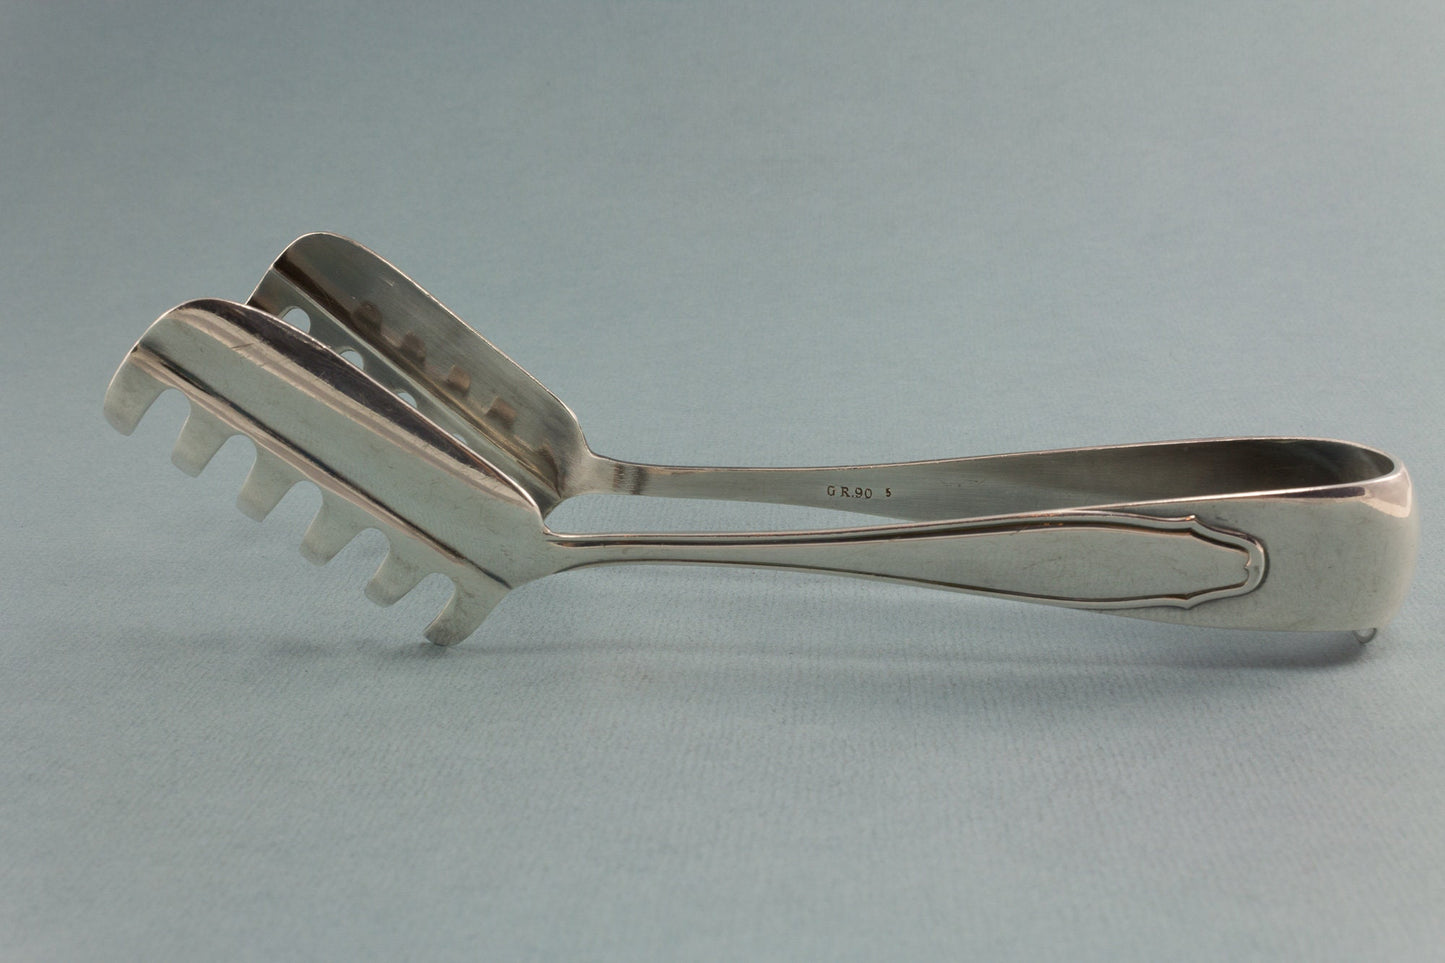 Silver-plated pliers , vintage tongs